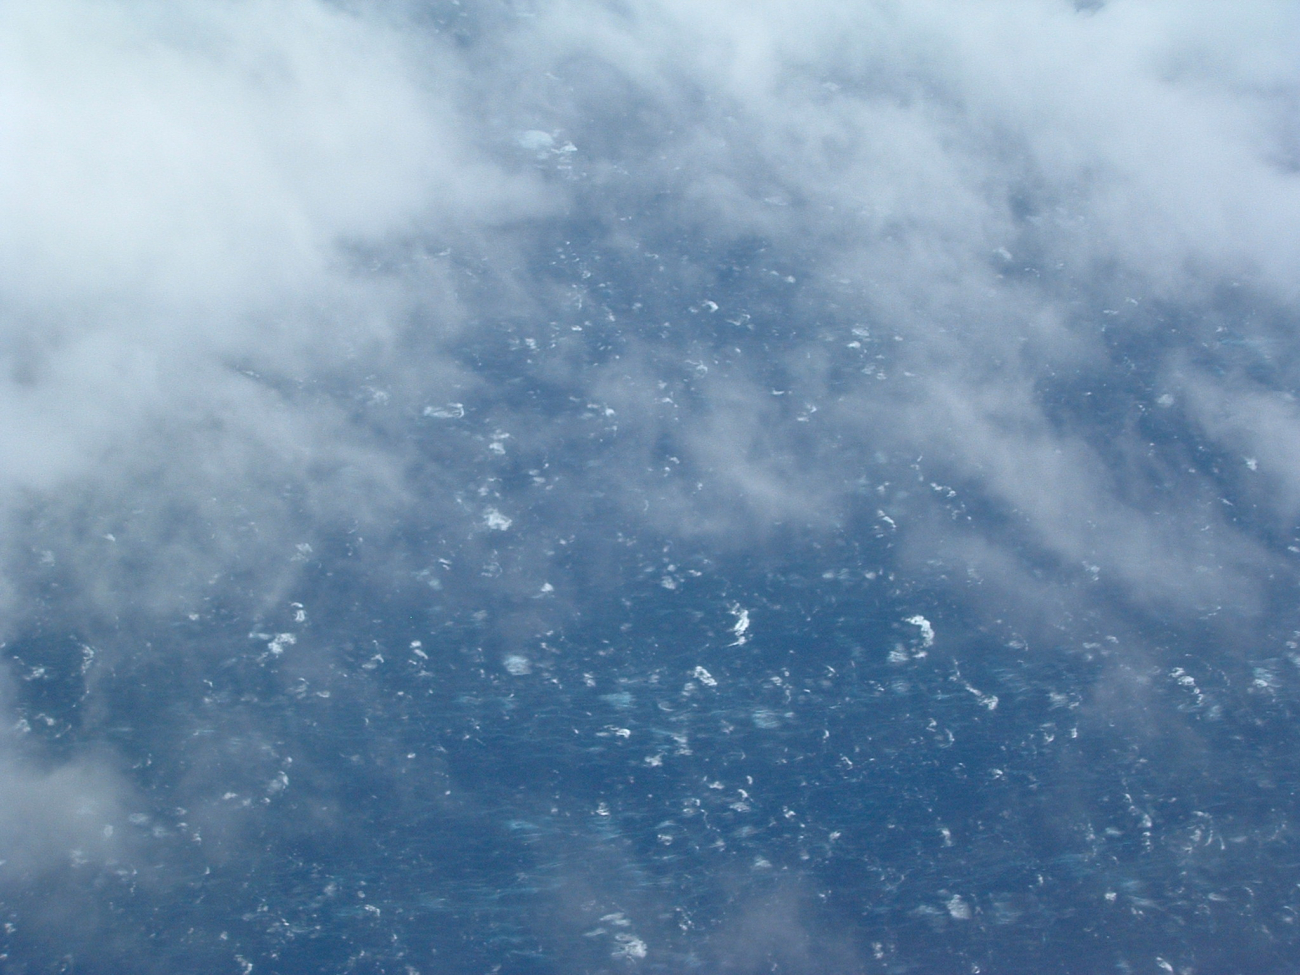 Ocean surface seen in Hurricane Fabian during low-level P-3 flight into storm